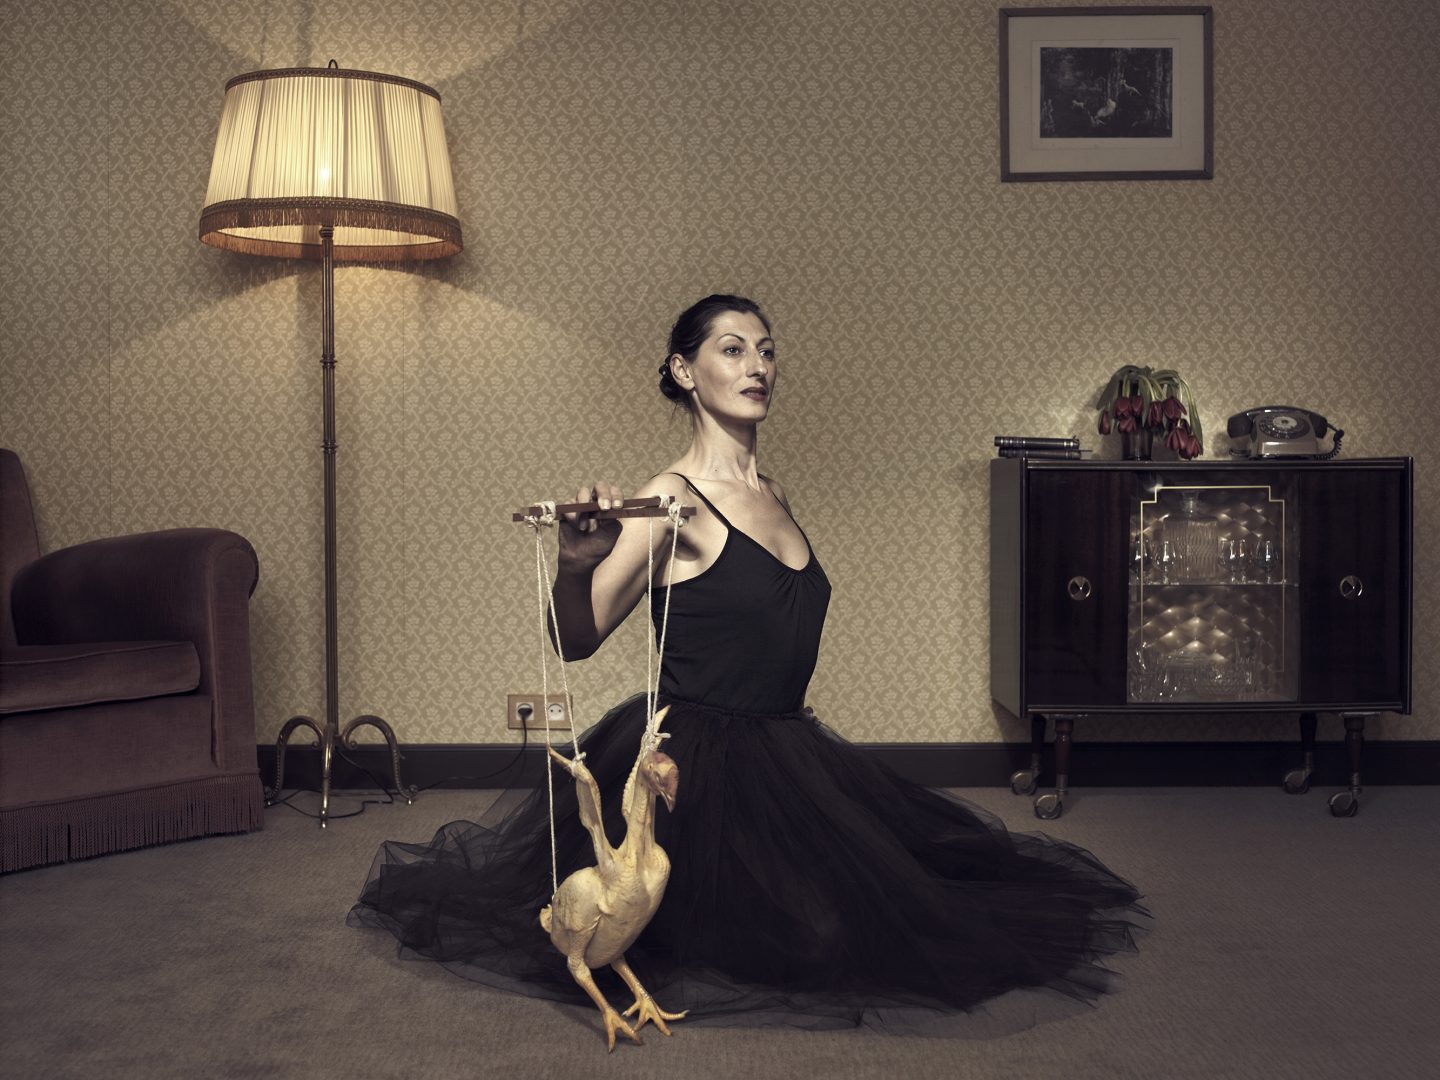 Woman playing with chicken in room 42 by Stefan Rappo